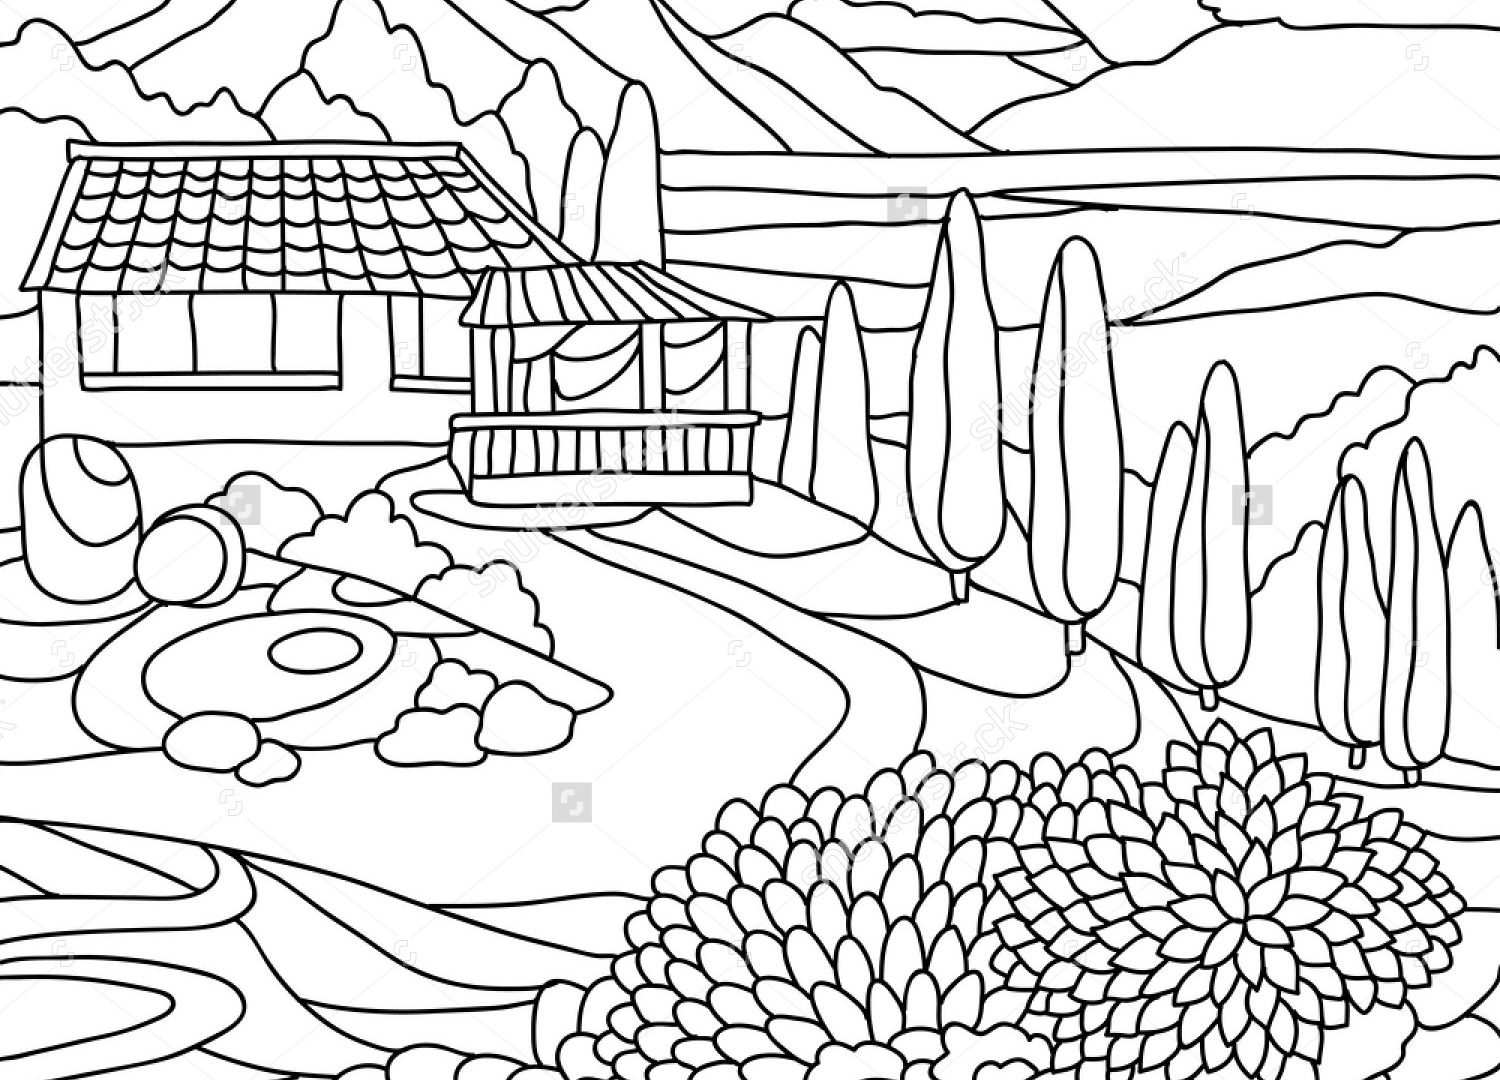 Mountain Scenery Coloring Pages at GetColorings.com   Free printable ...